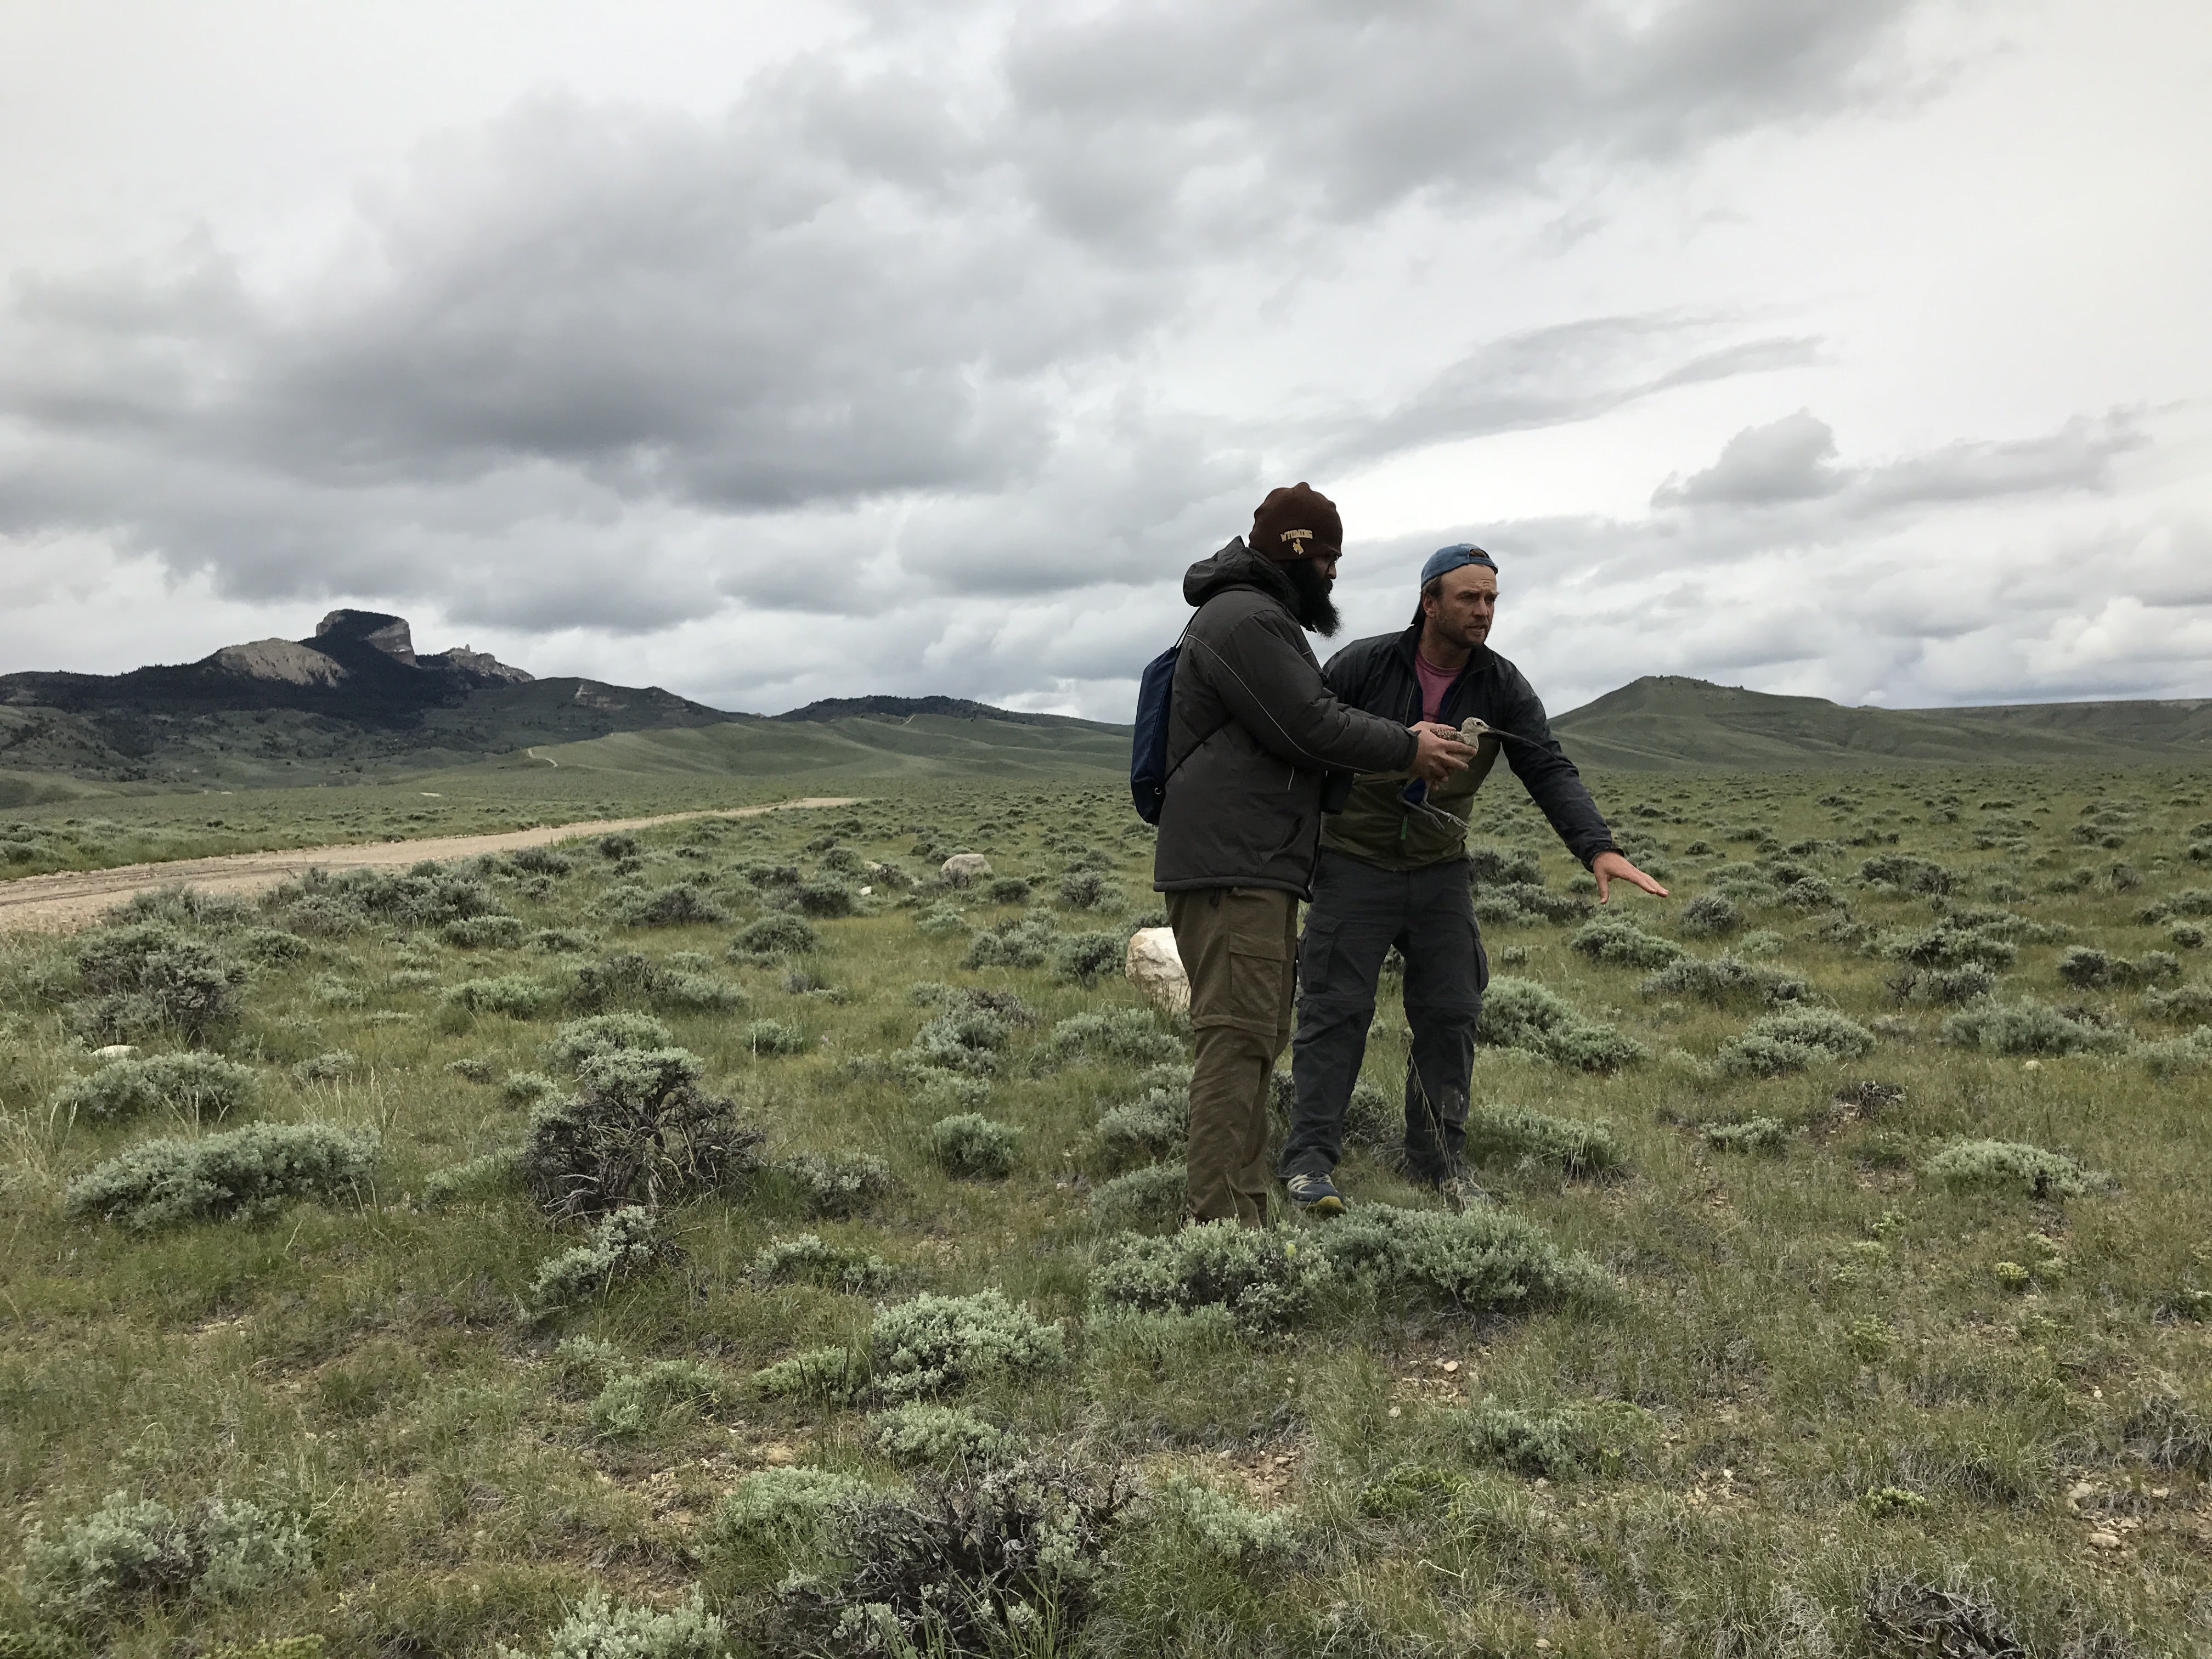 Jay works with Fernando (a Brazilian PhD student at U of WY) to release JT, with scenic Heart Mountain in the background.